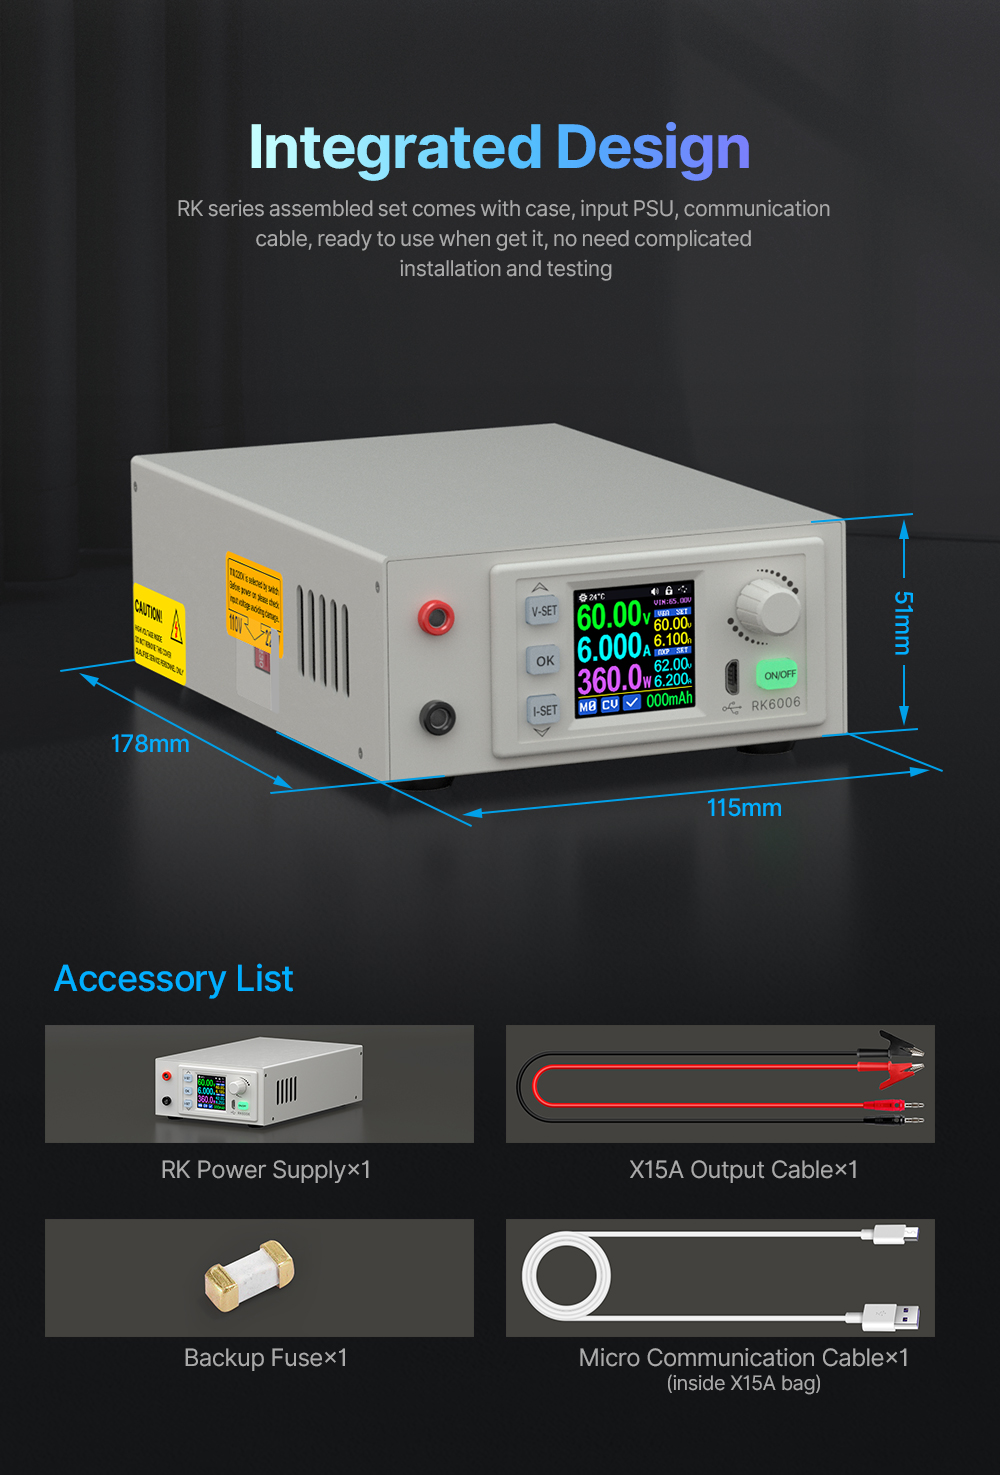 RIDEN RK6006-C Digital Power Supply High Precision 60V 6A with Overvoltage Protection and HD Display for Efficient Power Control